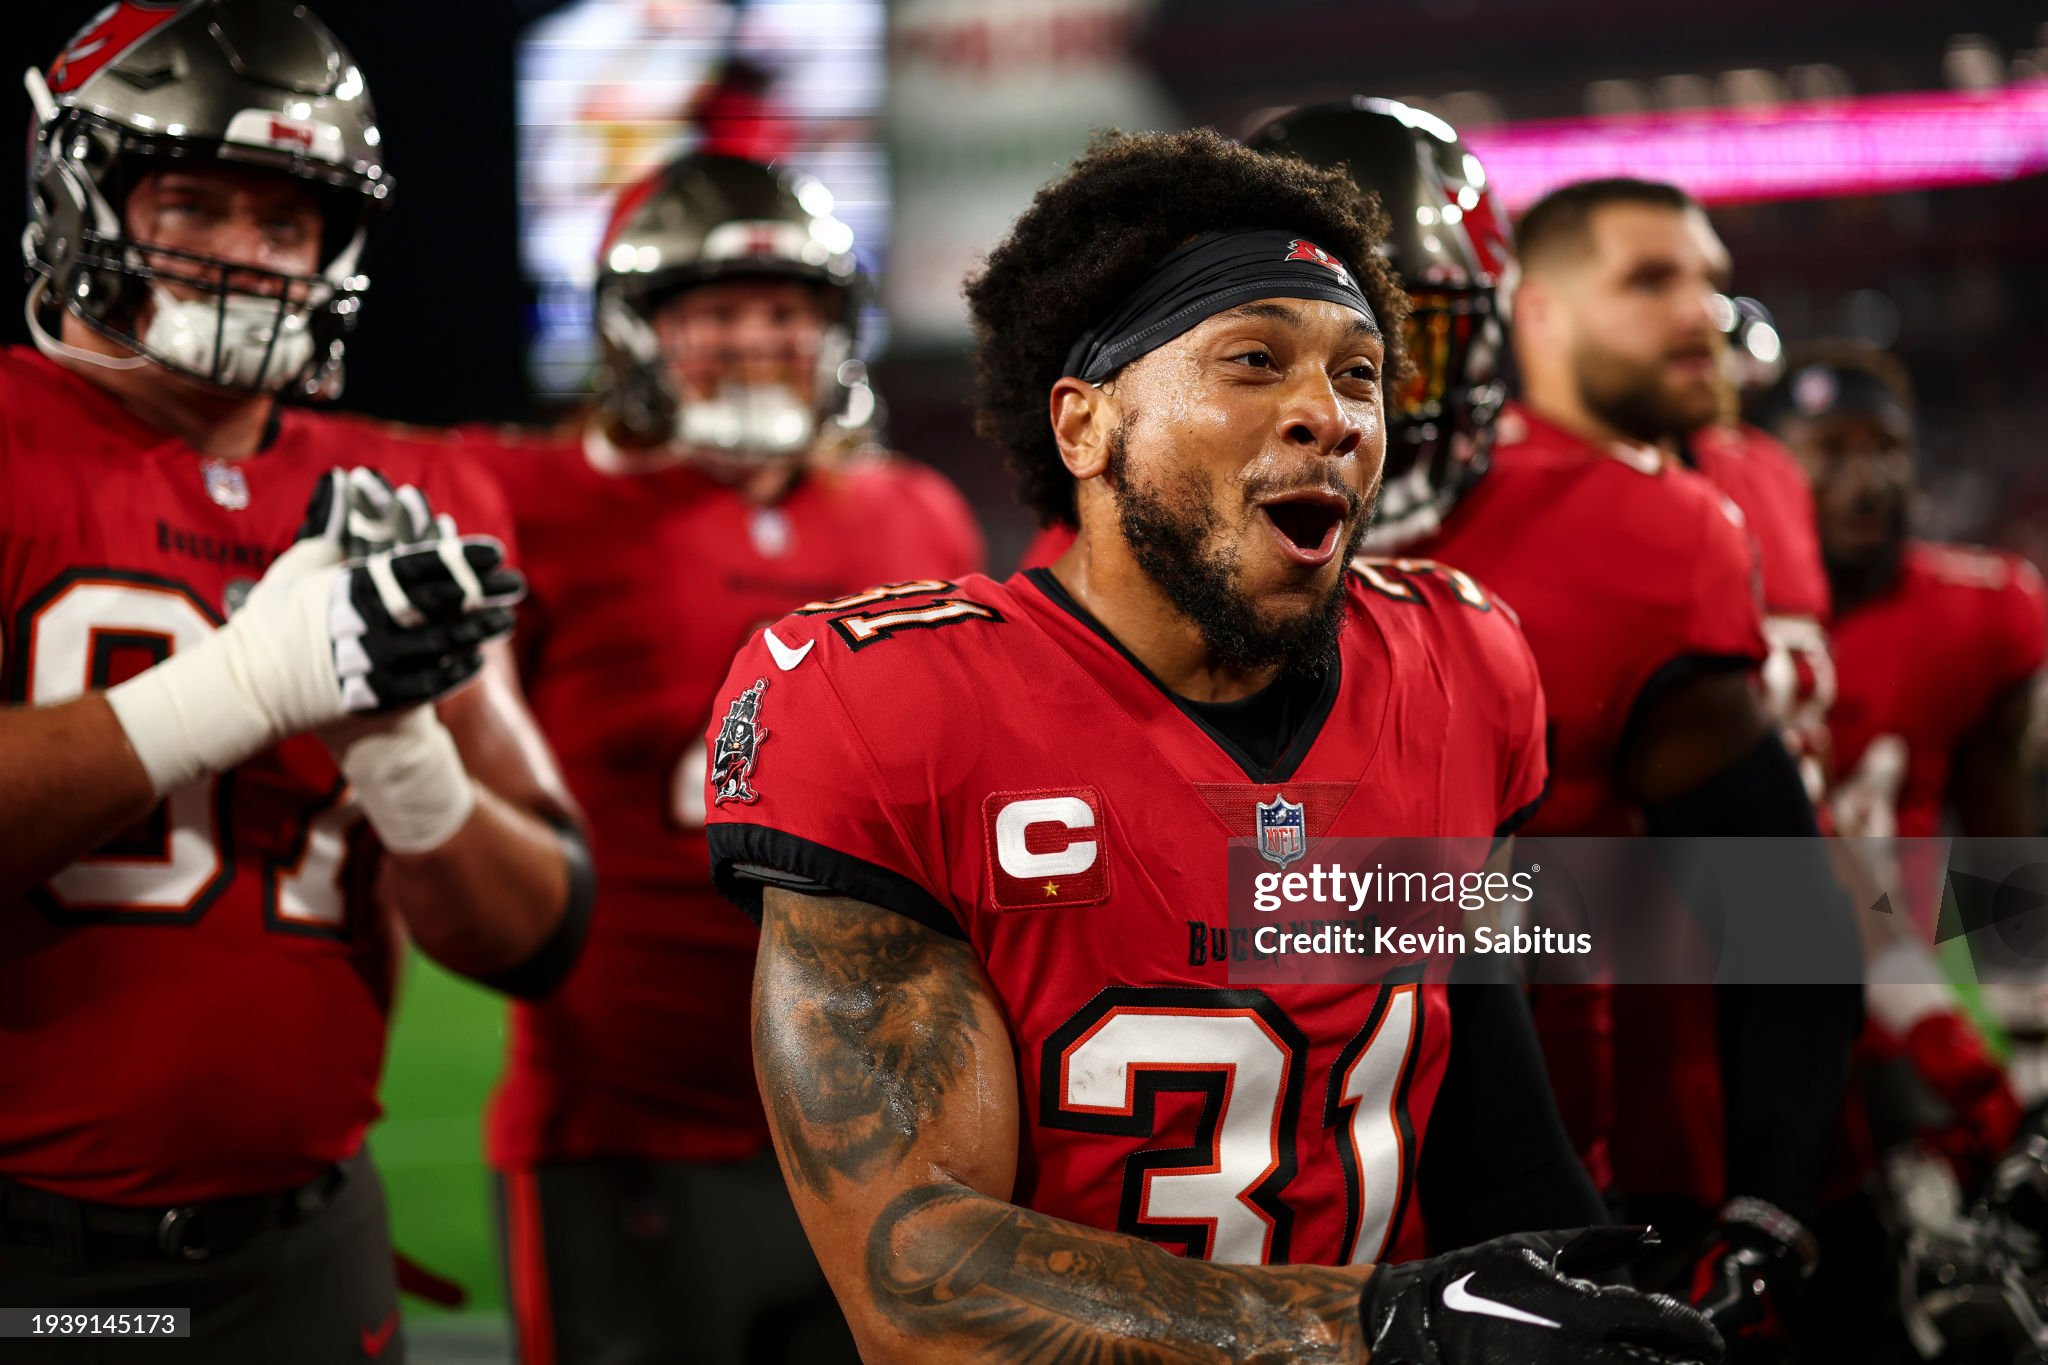 TAMPA, FL - JANUARY 15: Antoine Winfield Jr. #31 of the Tampa Bay Buccaneers gives a speech in the team huddle prior to an NFL wild-card playoff football game against the Philadelphia Eagles at Raymond James Stadium on January 15, 2024 in Tampa, Florida. (Photo by Kevin Sabitus/Getty Images)